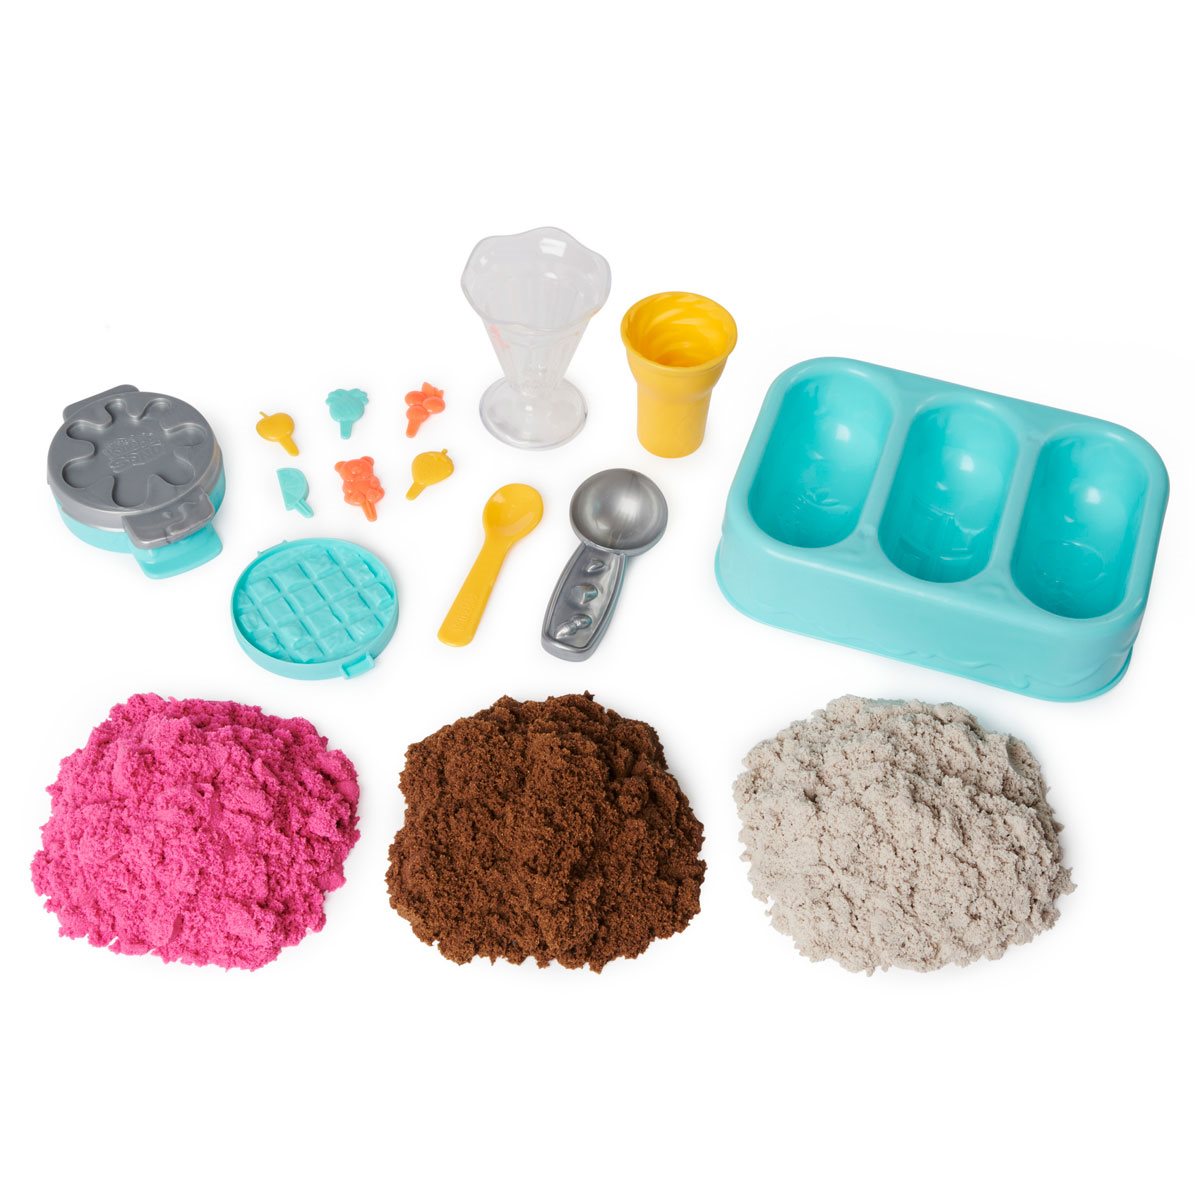 Kinetic Sand, Dig & Demolish Playset with 1lb Kinetic Sand and Toy Truck,  Play Sand Sensory Toys for Kids Ages 3 and up – Shop Spin Master